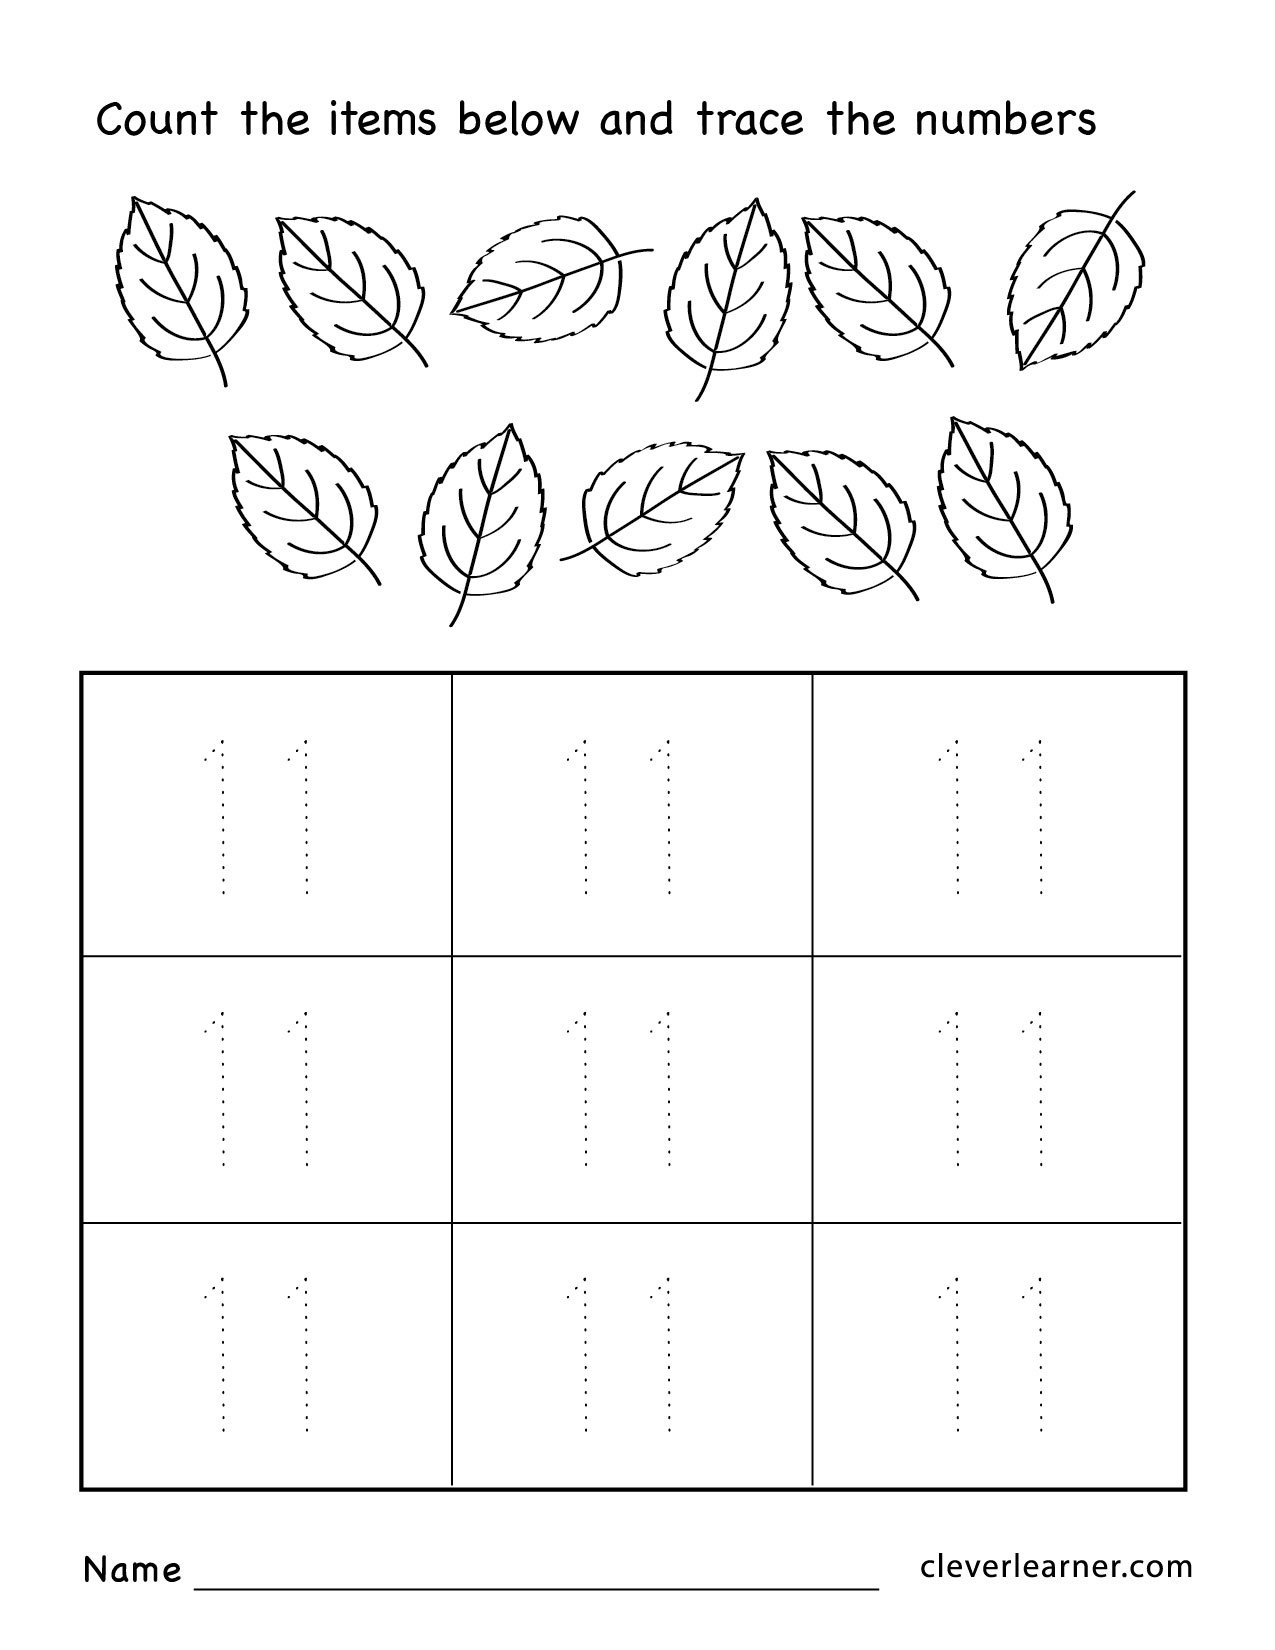 counting-and-writing-numbers-11-20-worksheets-writing-worksheets-free-numbers-11-20